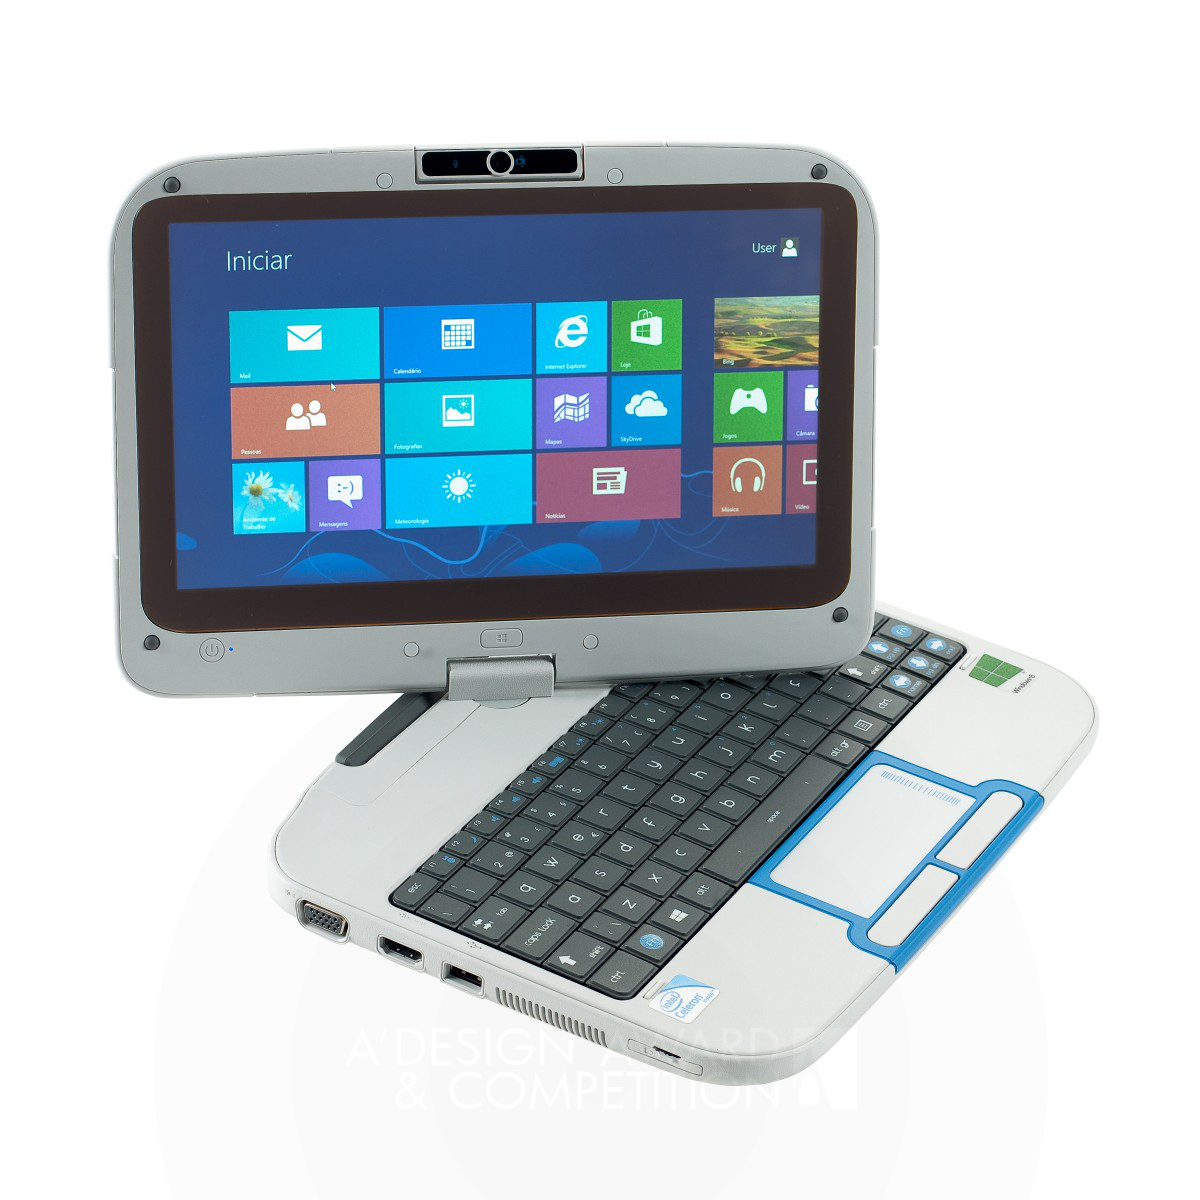 Pupil 108 <b>Convertible Device for Education